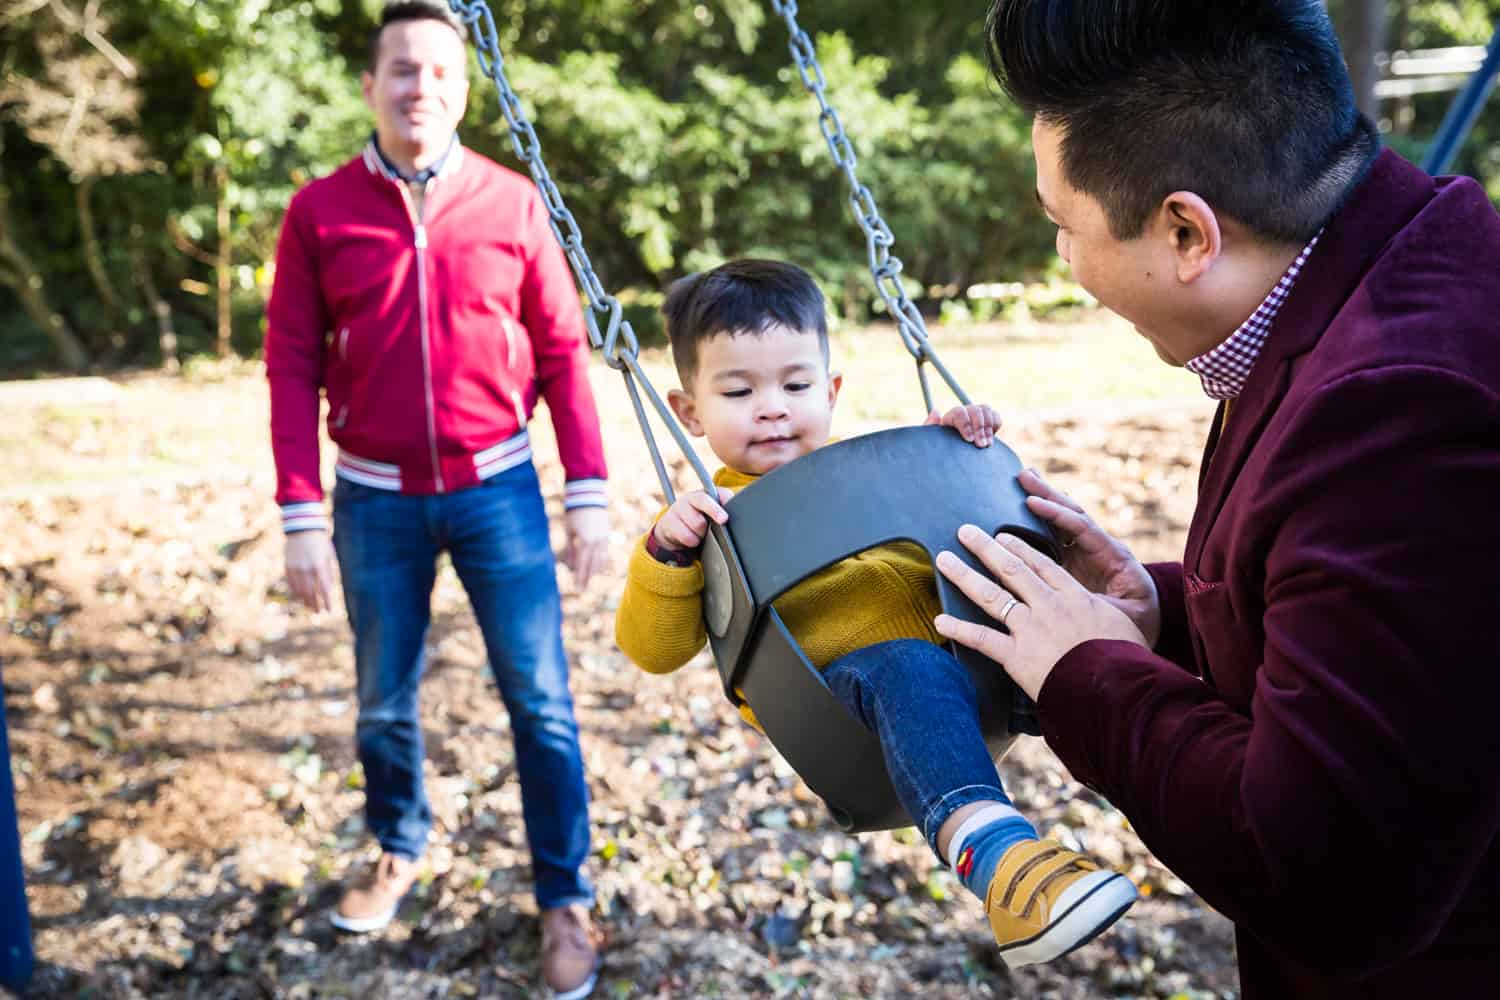 Two gay fathers playing with little boy on swing in playground